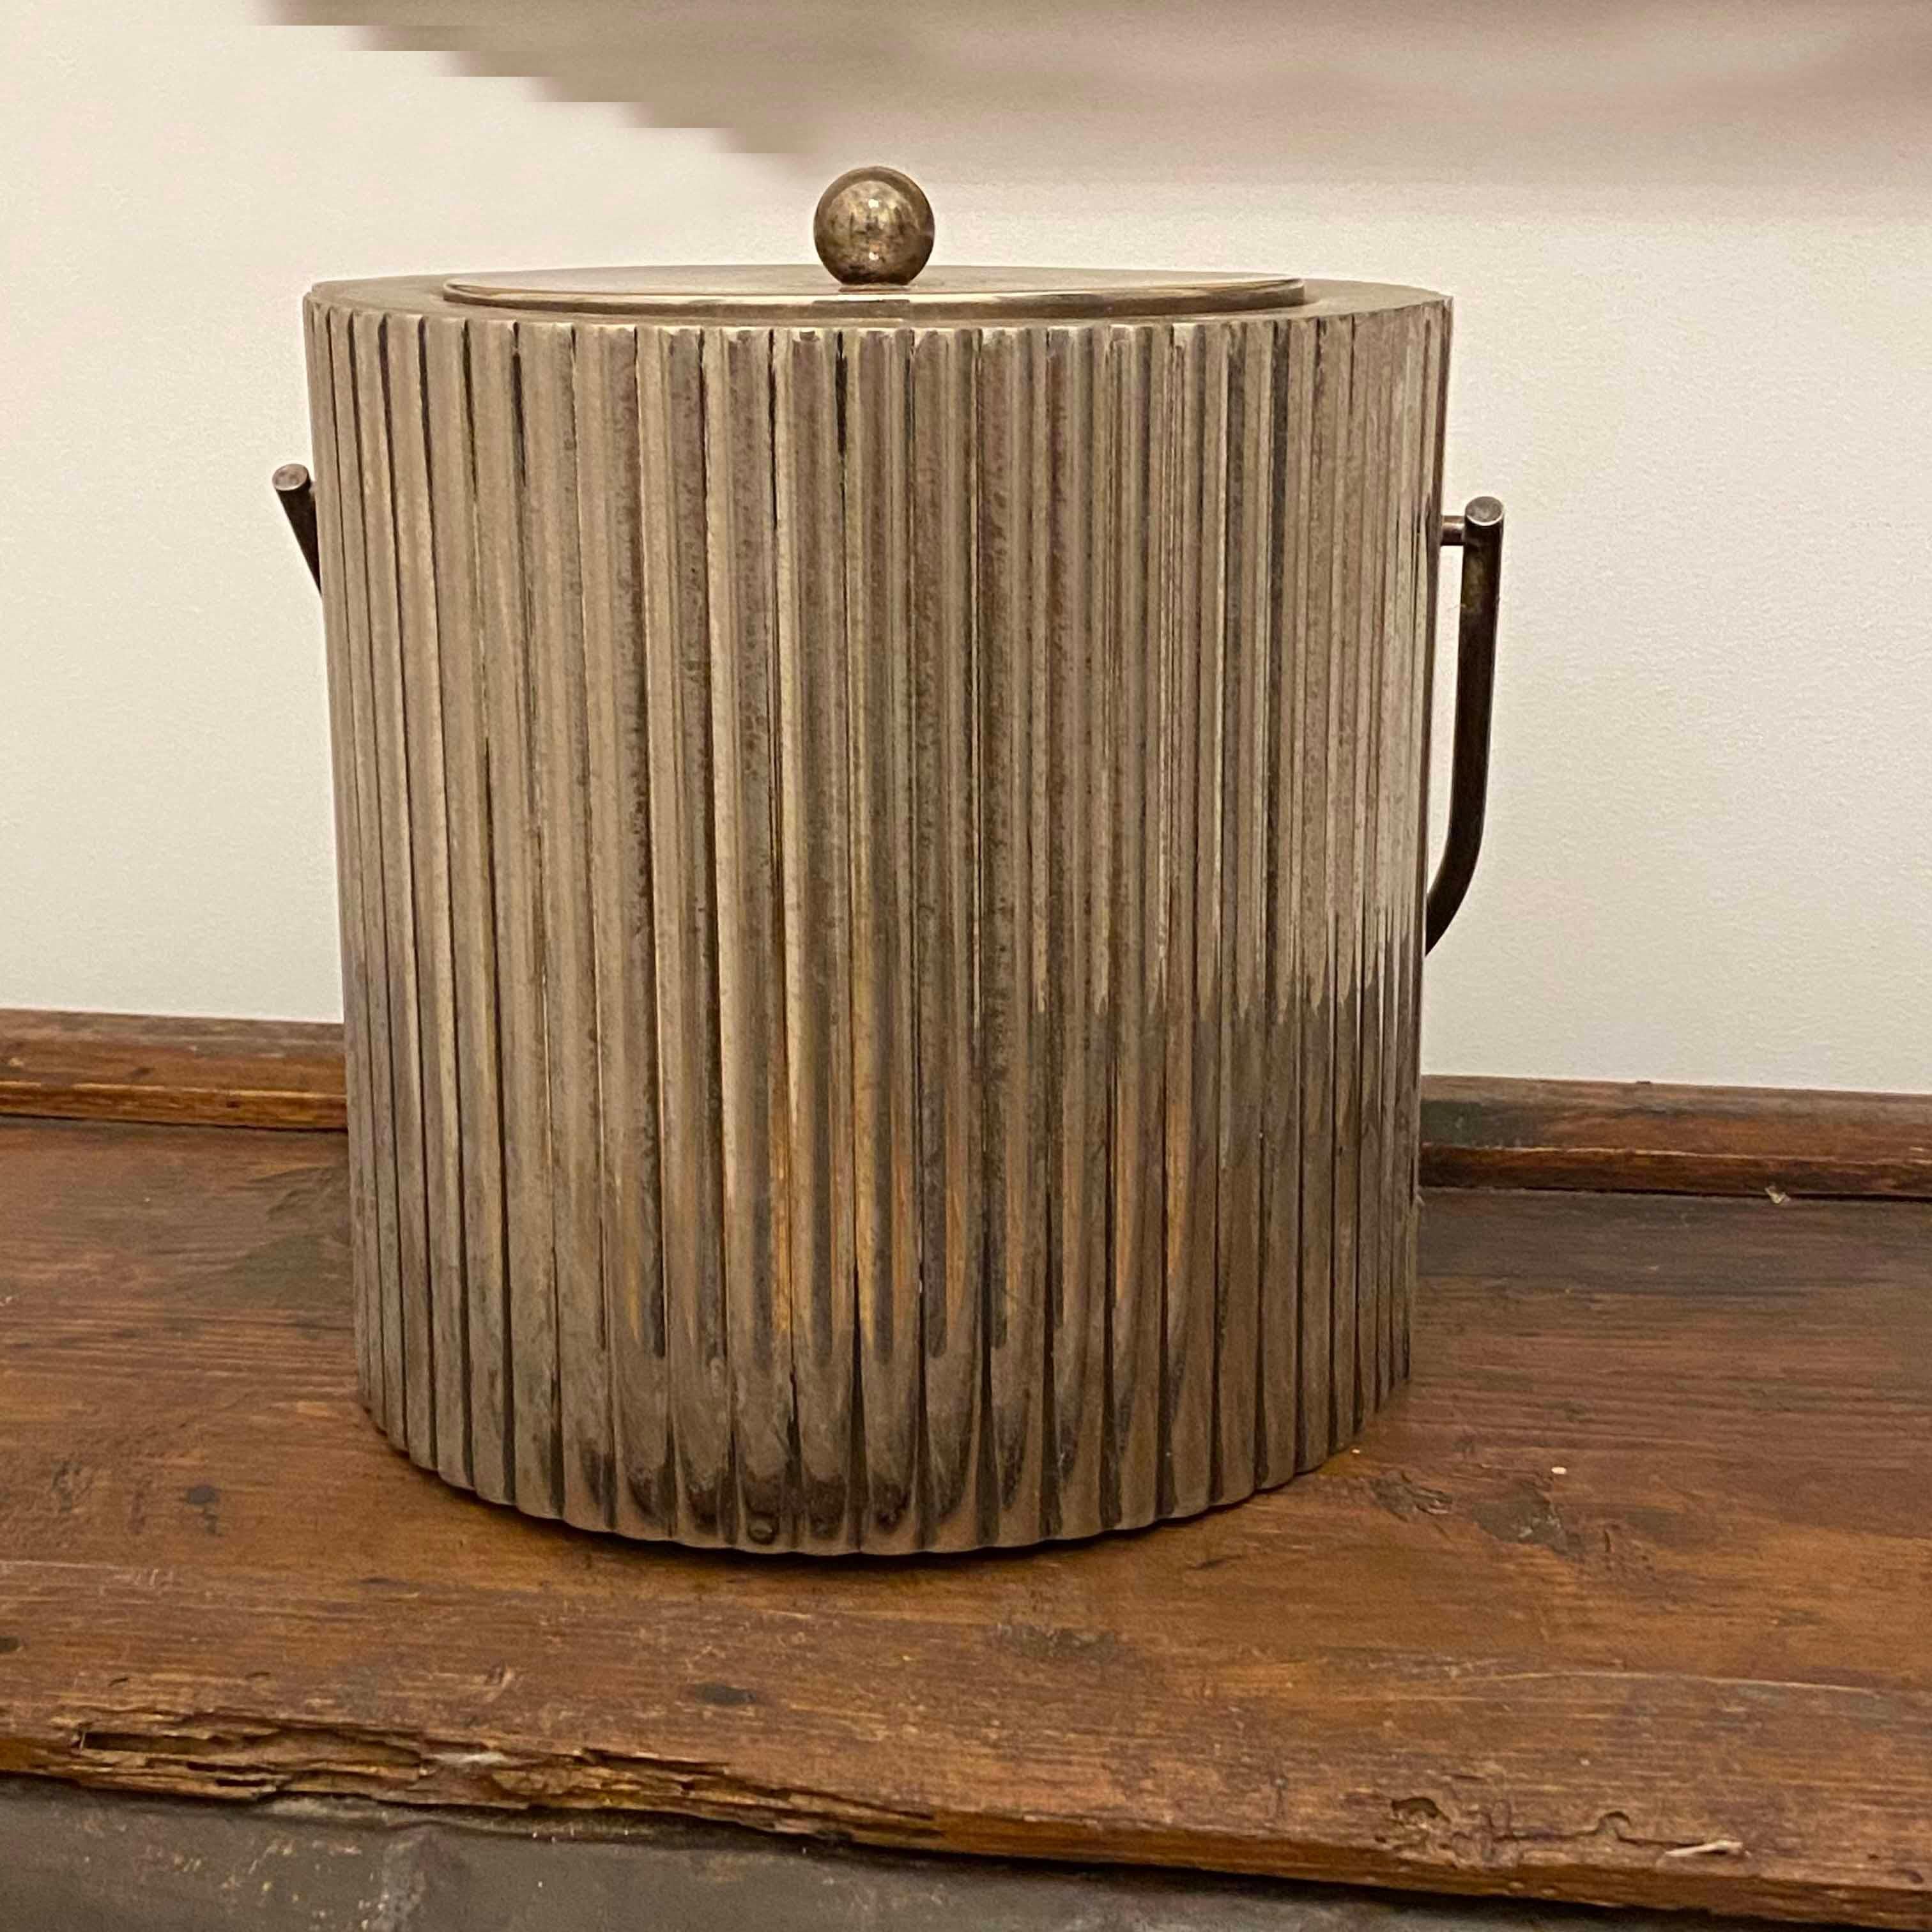 Beautifully handcrafted silver - plate ice bucket in the style of Josef Hoffmann made in Florence, Italy 1960s.
Makers mark on the bottom. 
Measures: 22.5 cm high and 22.7 cm diameter
Max height with handle up 40 cm
Very nice condition, almost